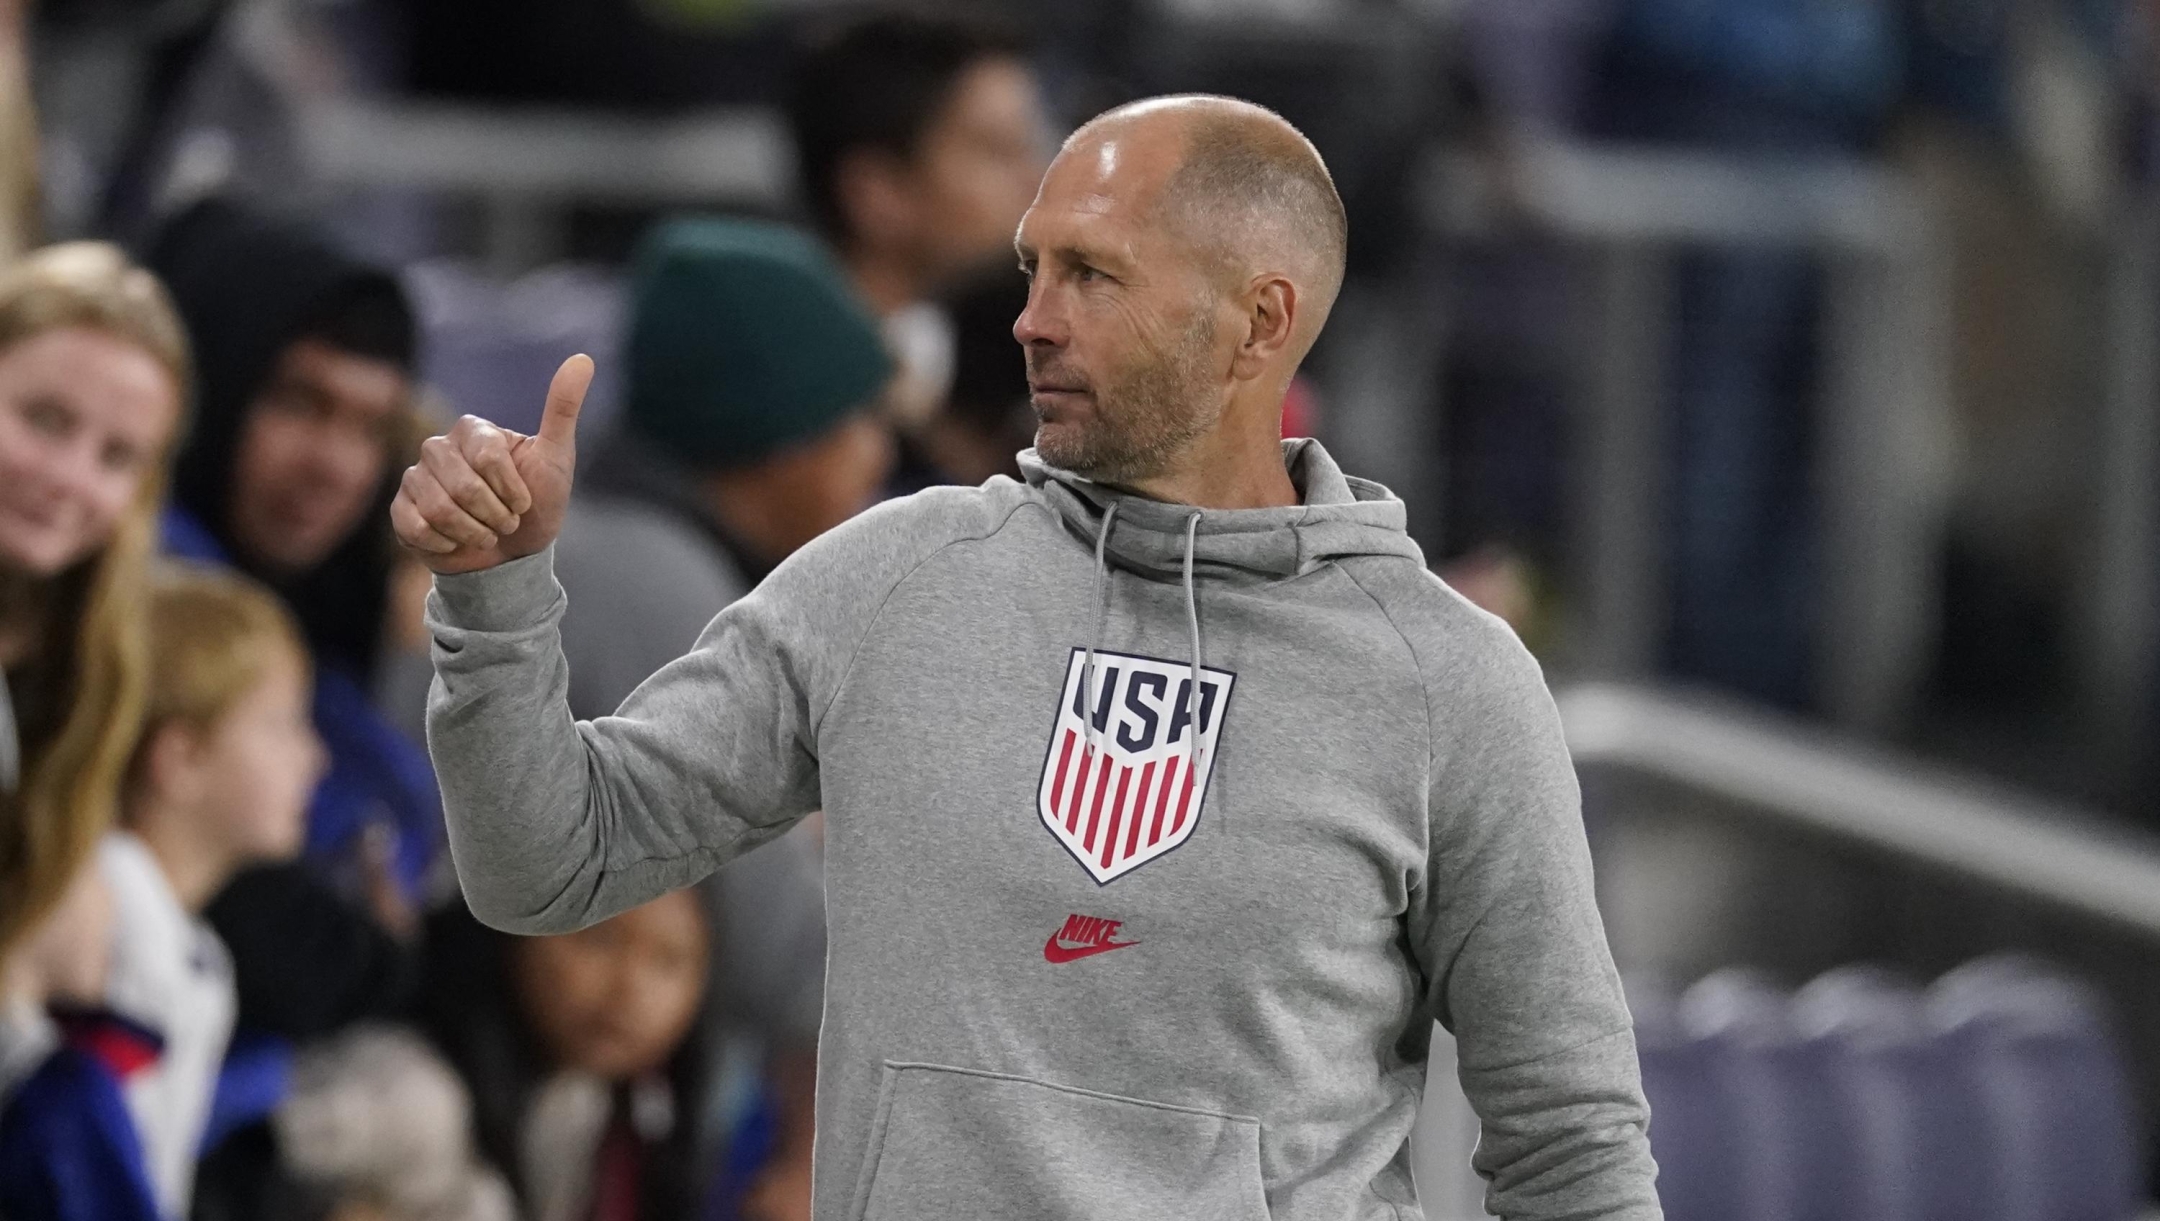 United States head coach Gregg Berhalter gives a thumbs up to fans after the team's 4-0 win against Ghana in an international friendly soccer match Tuesday, Oct. 17, 2023, in Nashville, Tenn. (AP Photo/George Walker IV)